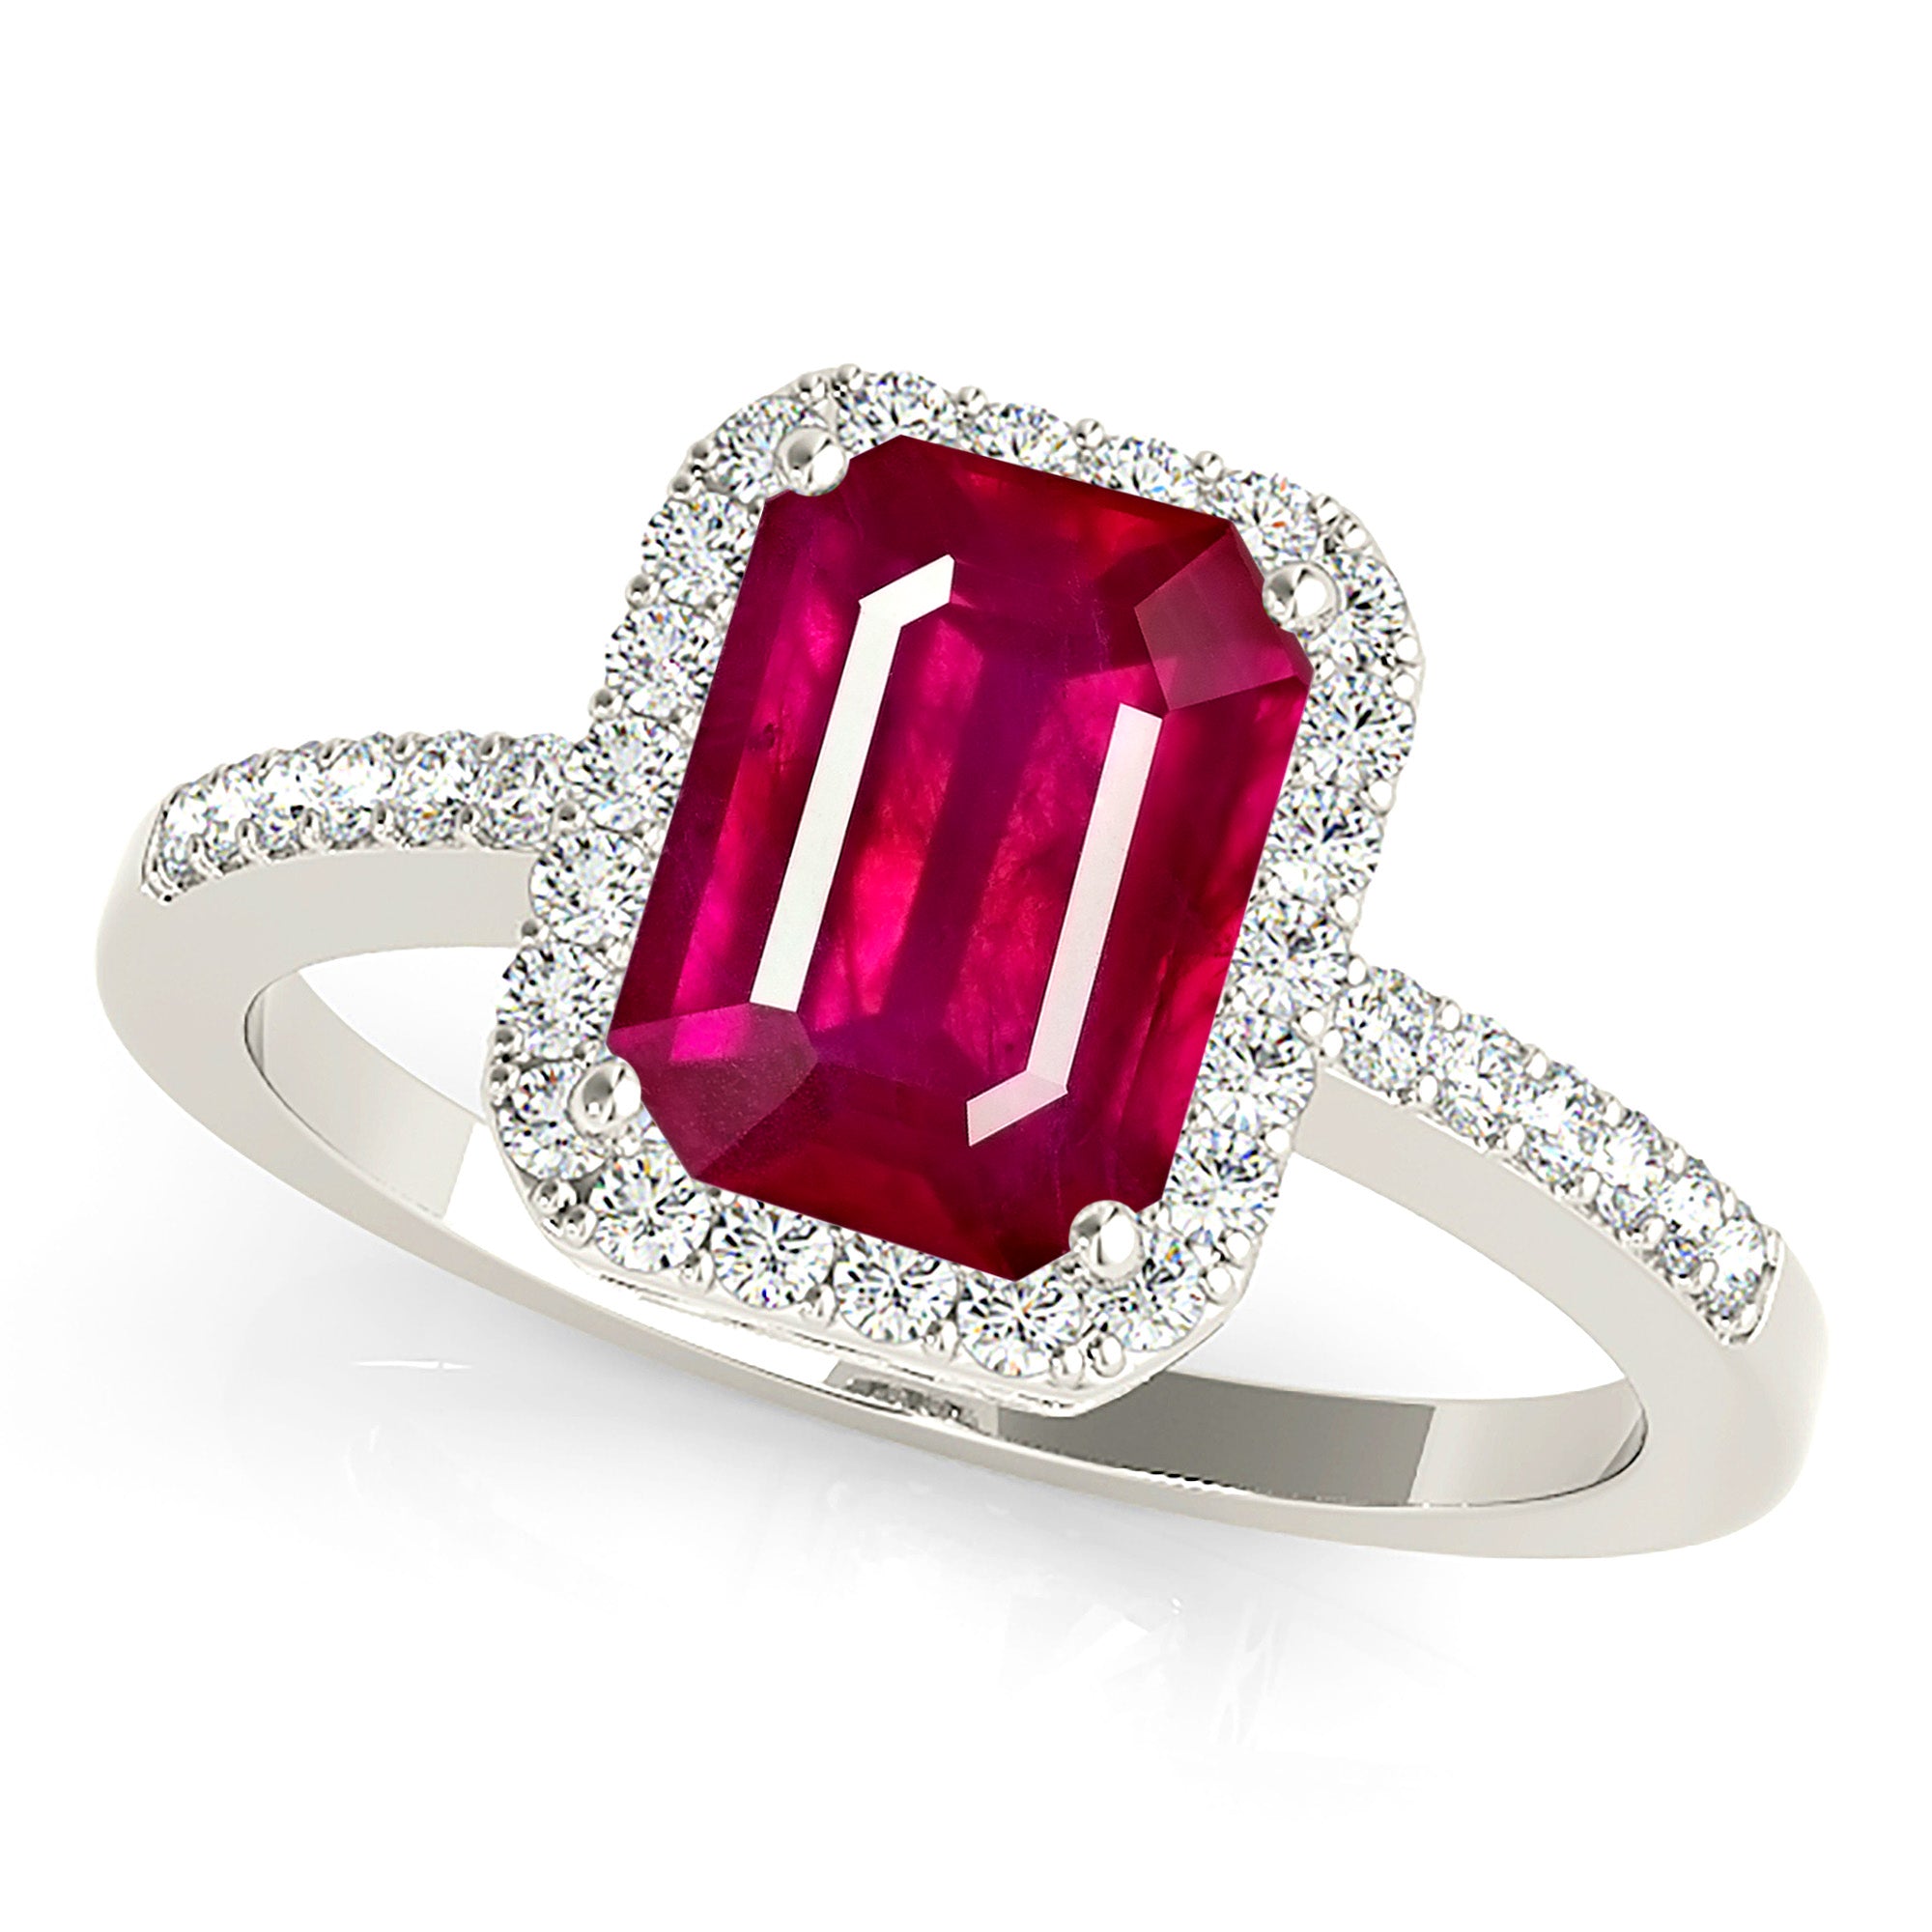 2.30 ct. Genuine Emerald Cut Ruby Ring With 0.25 ctw. Diamond Halo And Delicate Diamond Band-VIRABYANI